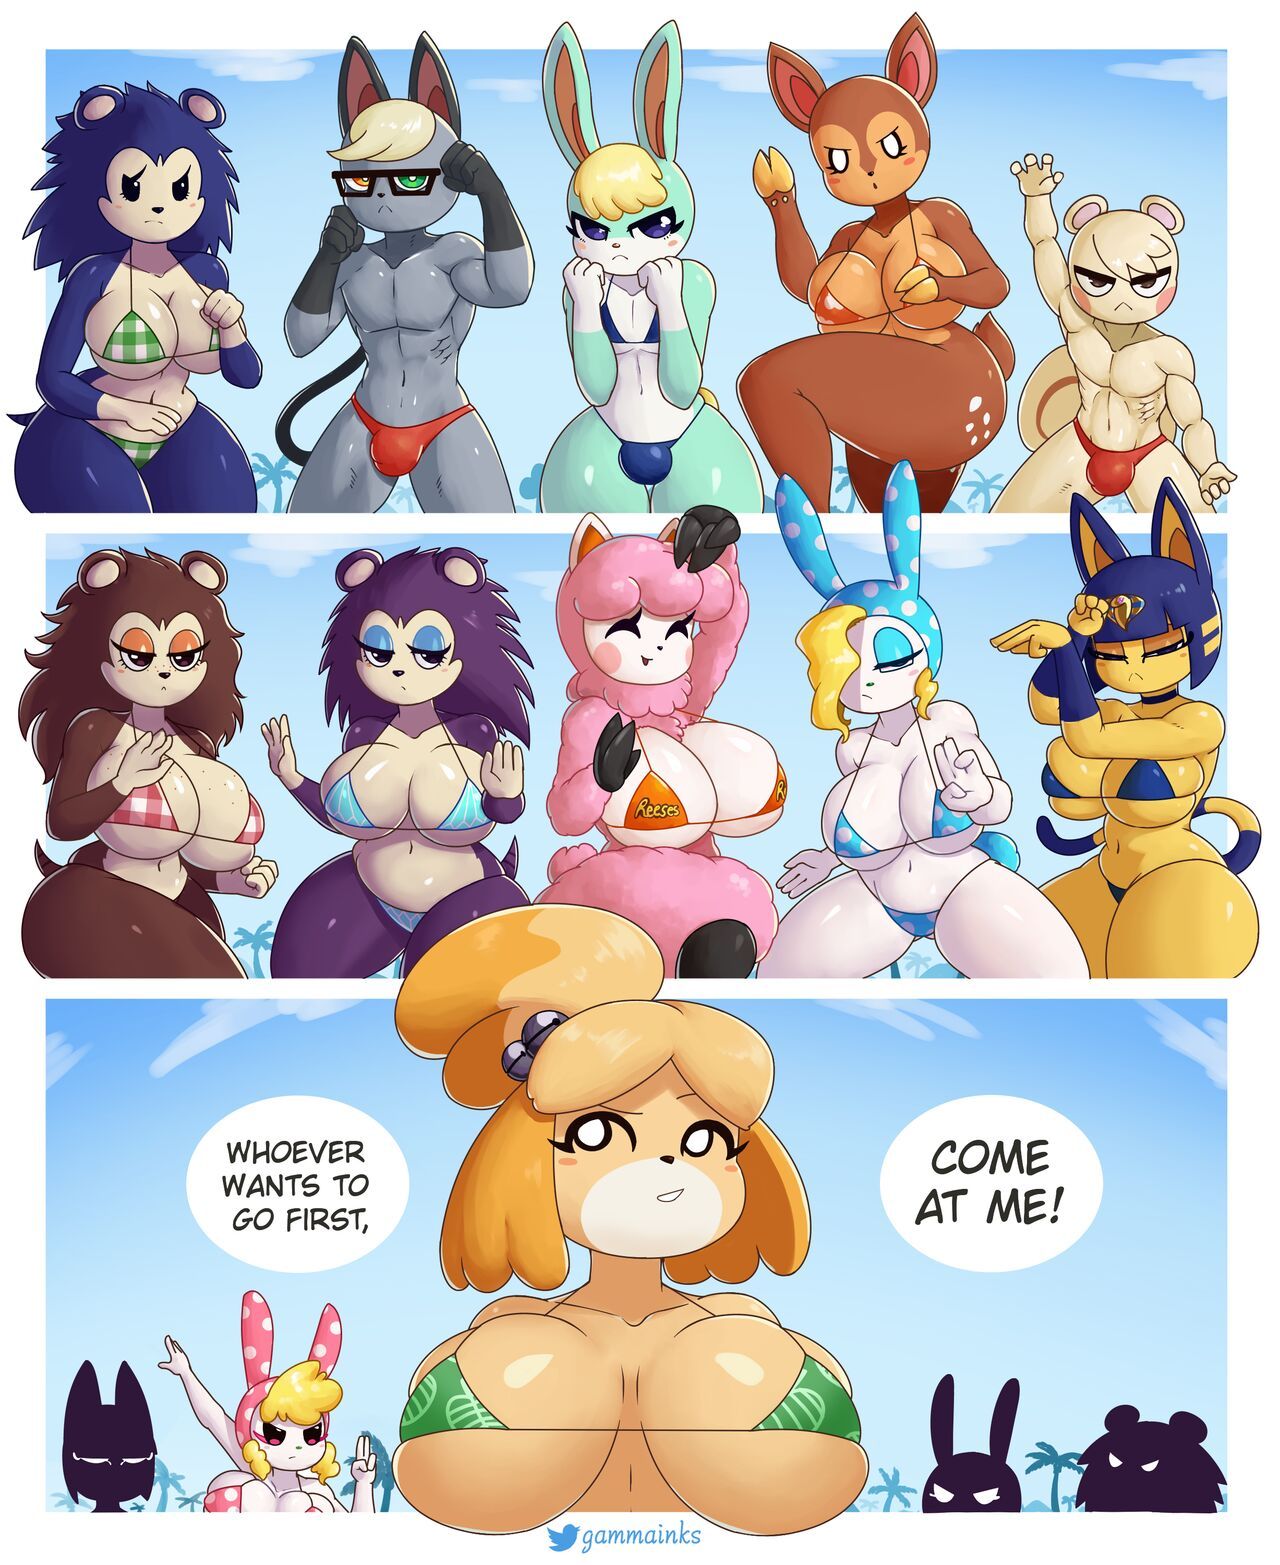 [Gammainks] Isabelle's challenge (Animal Crossing) [Ongoing] 2